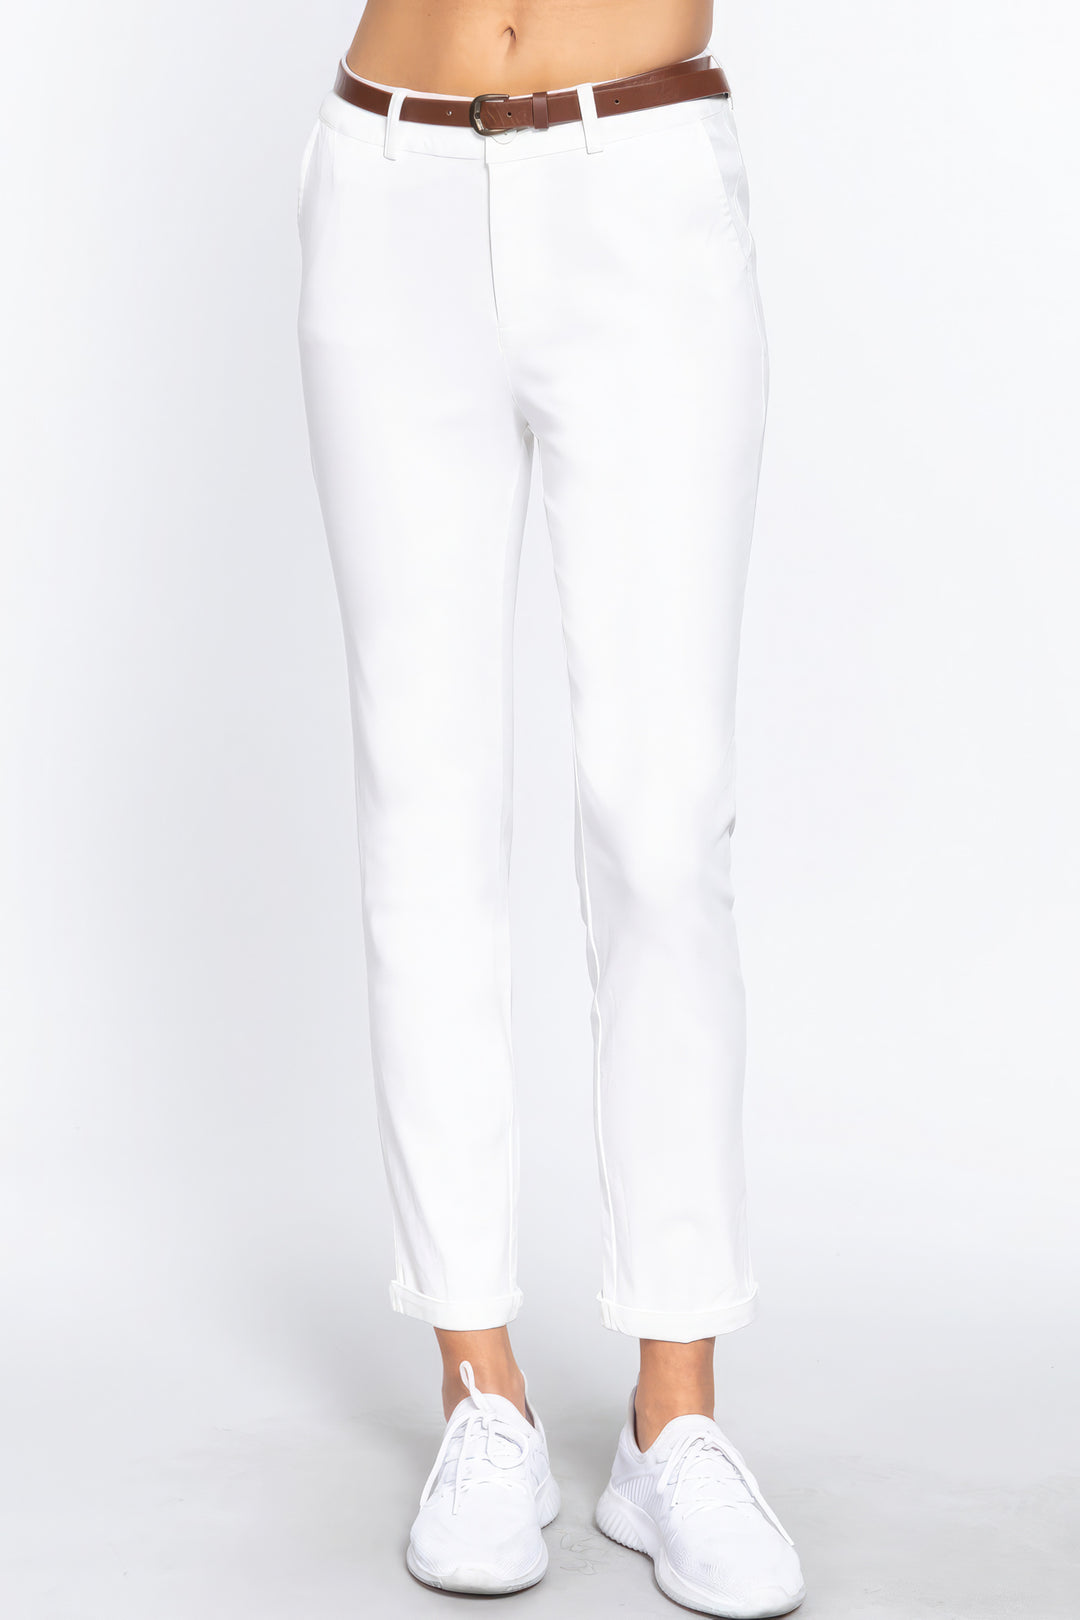 Cotton-span Twill Belted Long Pants with Belt | Comfort Fit, Off White, Sizes S-L